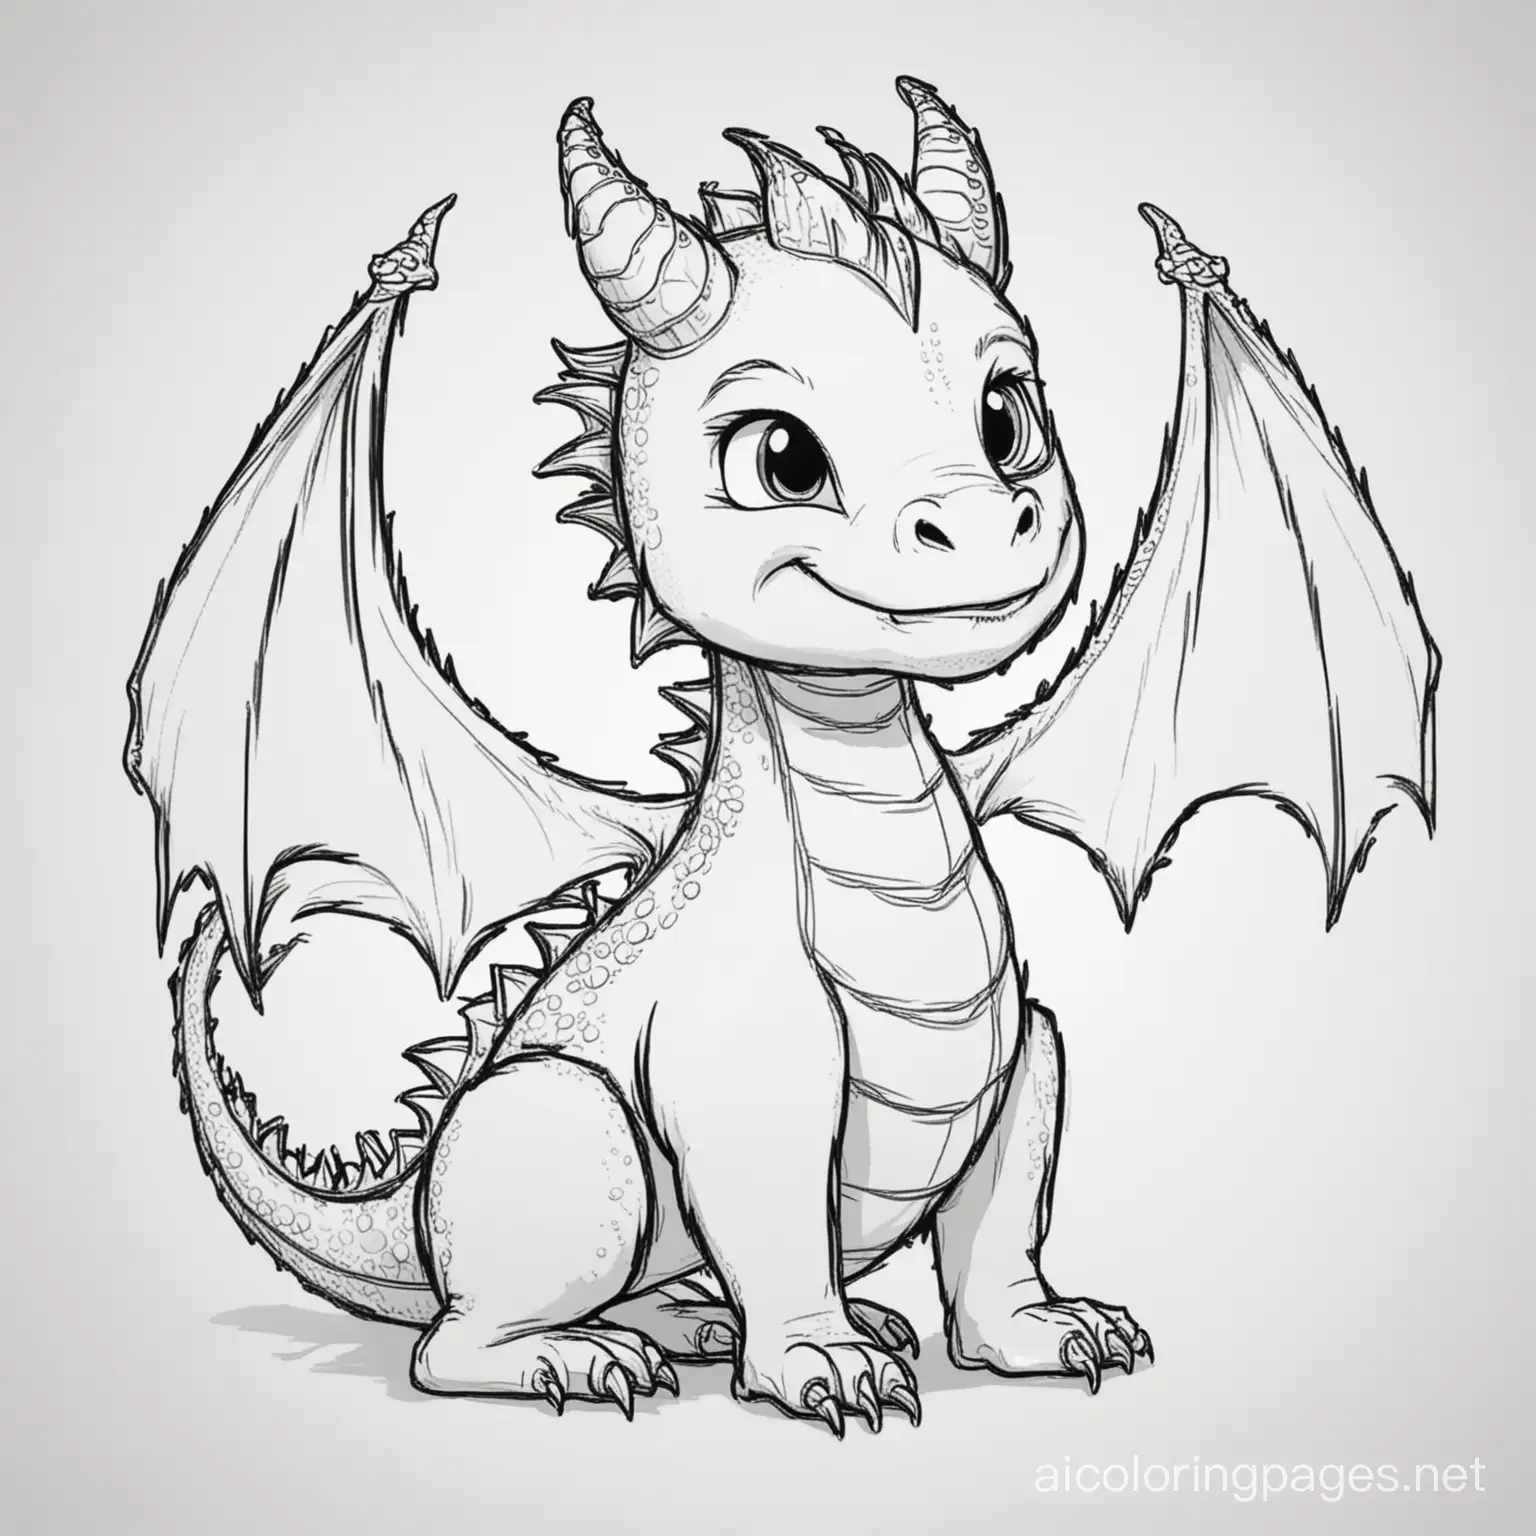 dragon, Coloring Page, black and white, line art, white background, Simplicity, Ample White Space. The background of the coloring page is plain white to make it easy for young children to color within the lines. The outlines of all the subjects are easy to distinguish, making it simple for kids to color without too much difficulty